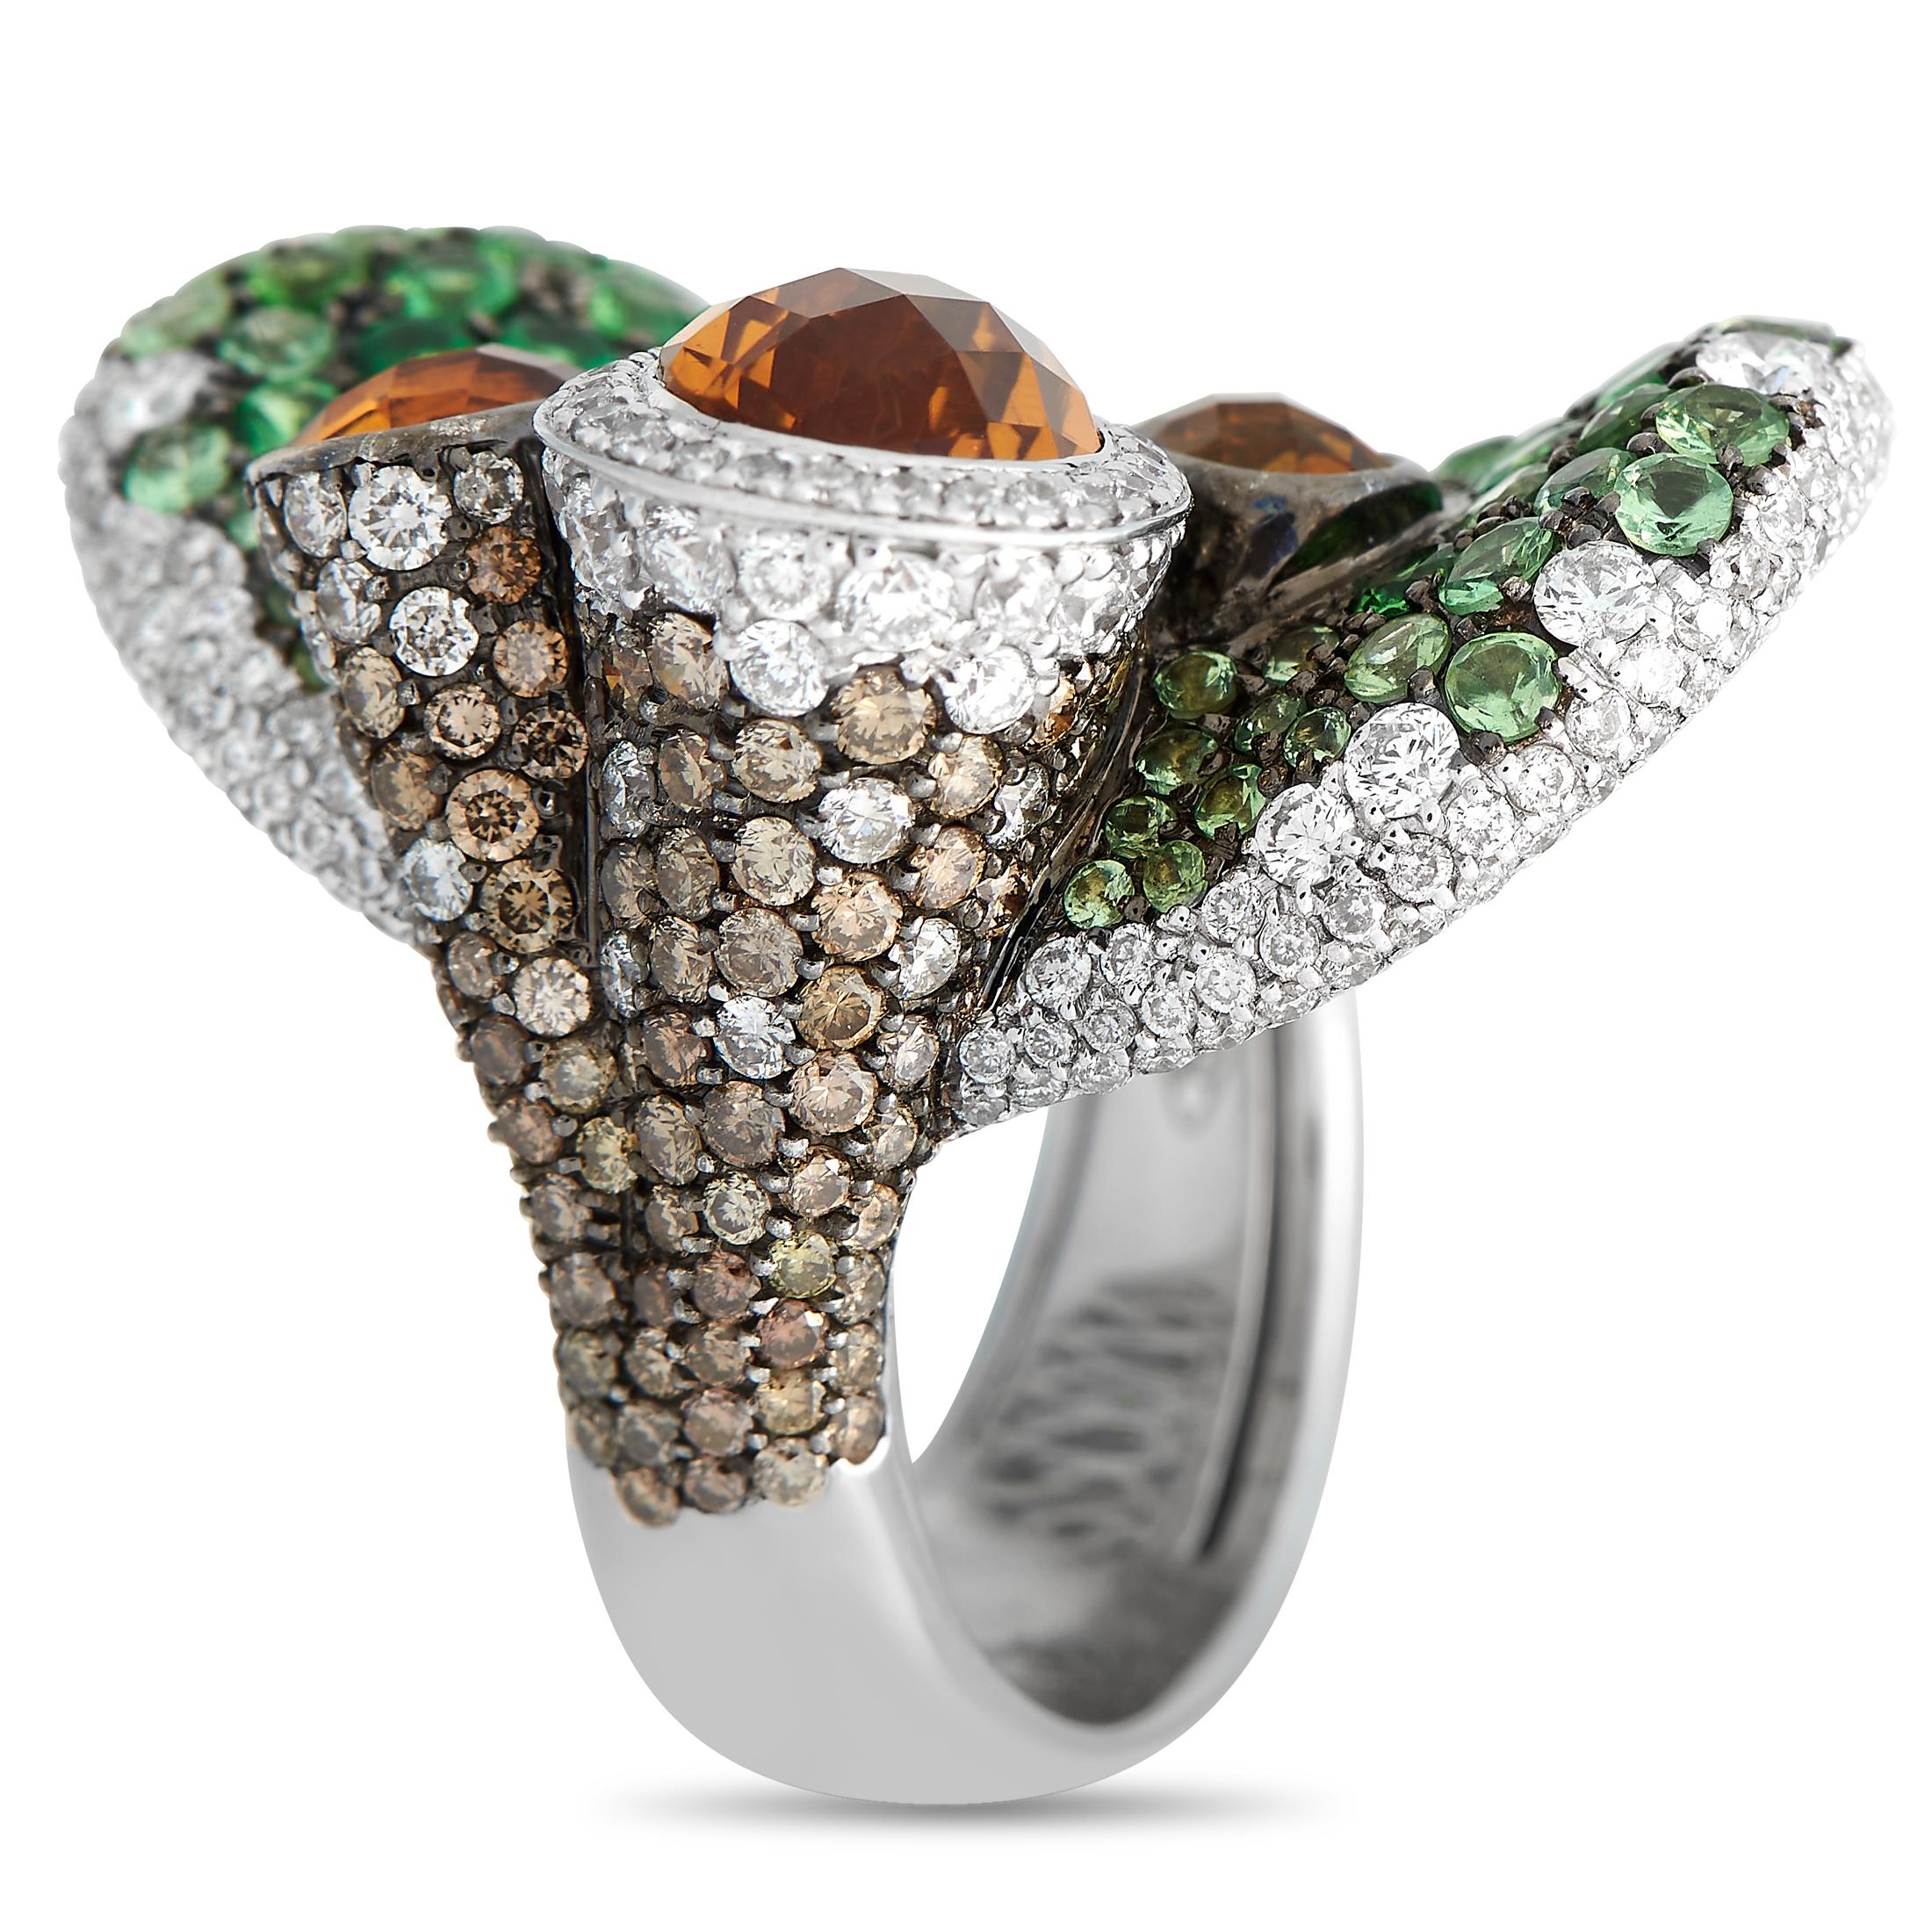 This ring from Maggioro's Rhapsody Collection is luxurious and unique. It is made of 18K white gold and features a design that features 0.97 carats of brown diamonds, and 2.12 carats of white diamonds. Lastly, the ring features 3.71 carats of